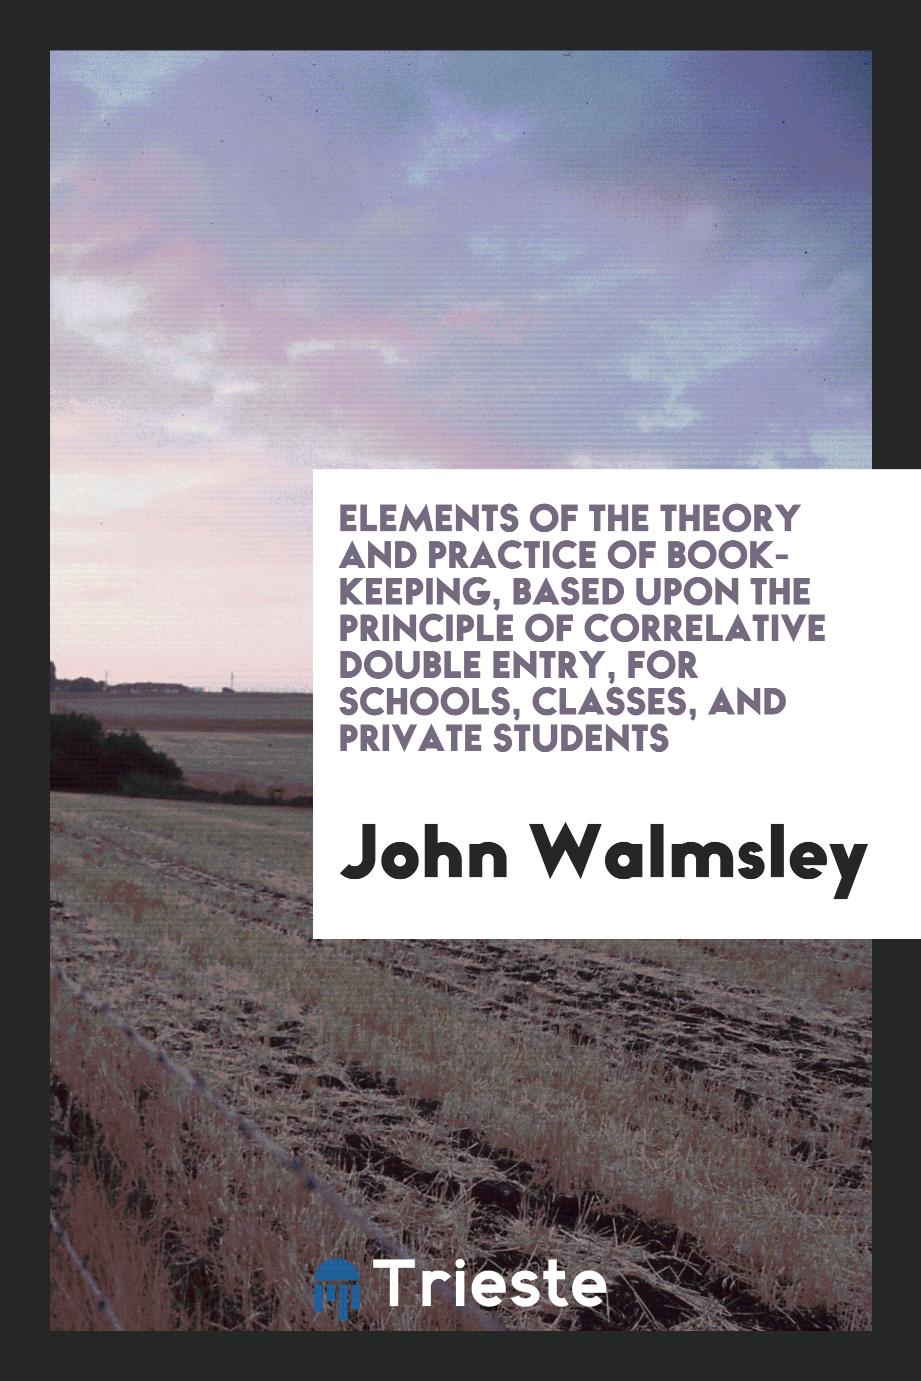 Elements of the theory and practice of book-keeping, based upon the principle of correlative double entry, for schools, classes, and private students